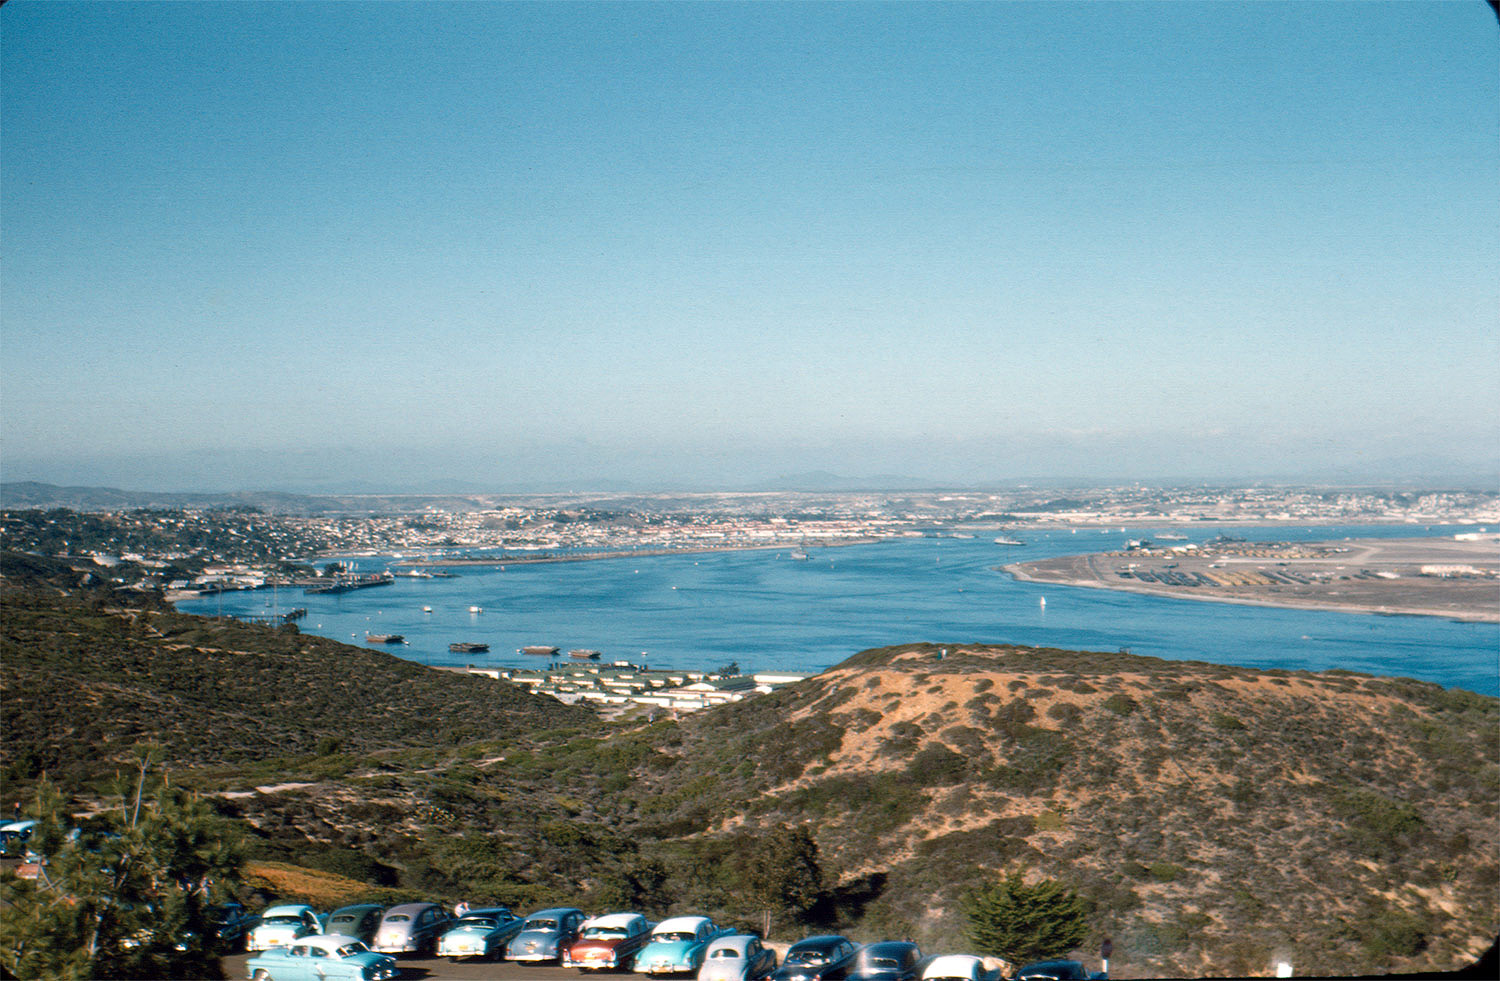 A lake and old cars, somewhere in California? Another thrift store slide. View full size.